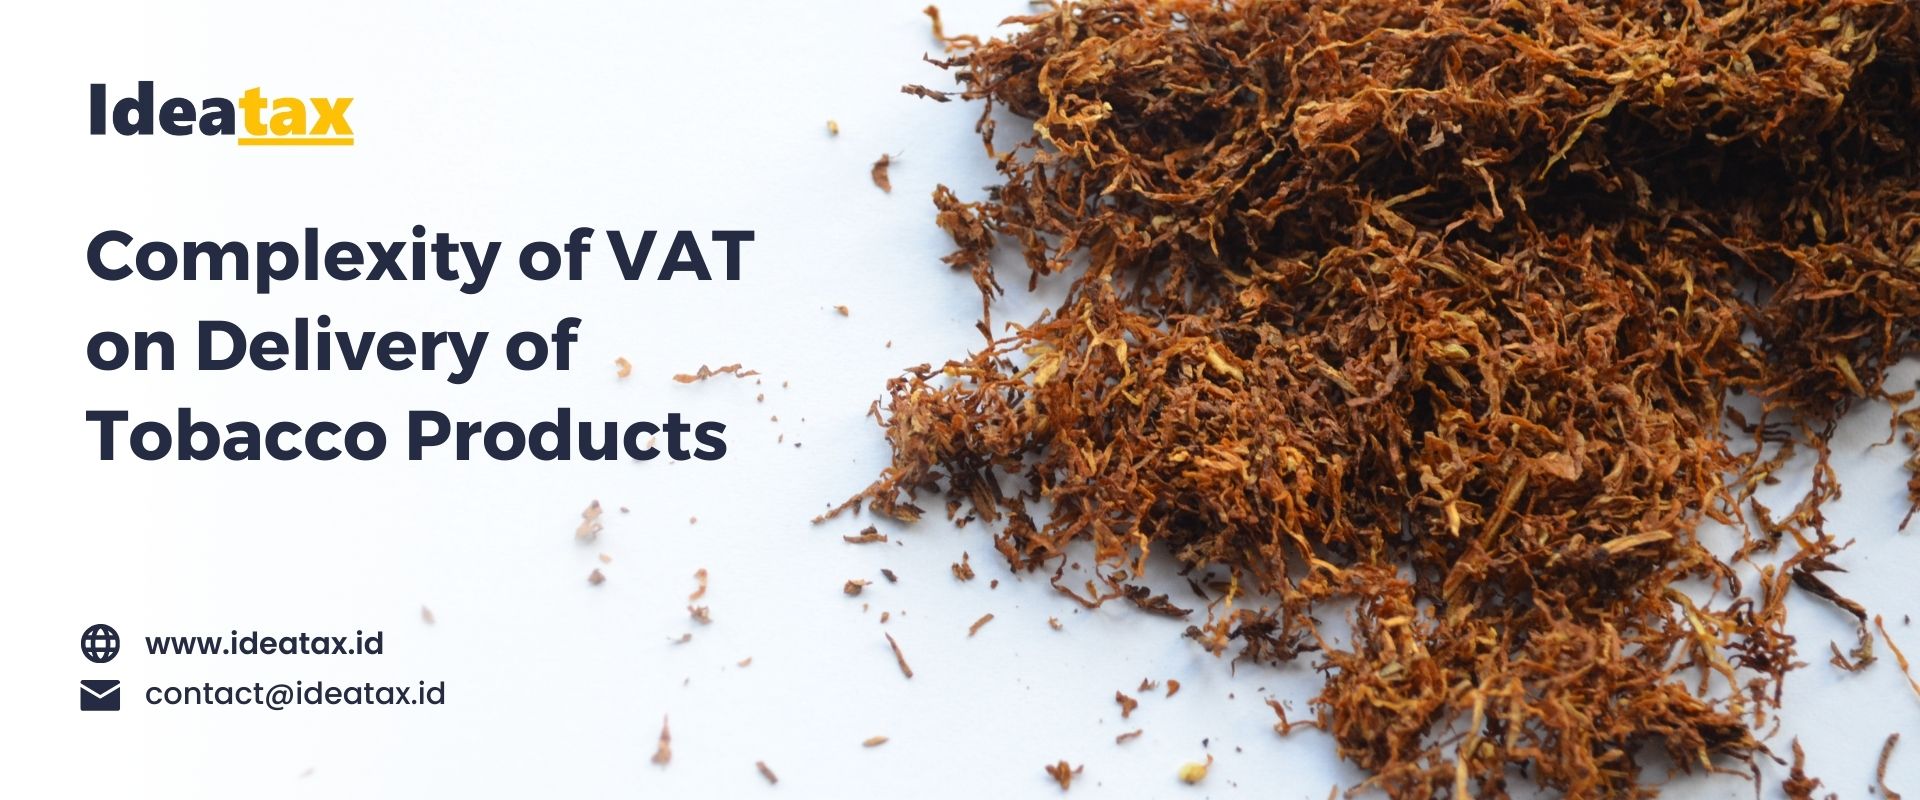 Complexity of VAT on Delivery of Tobacco Products